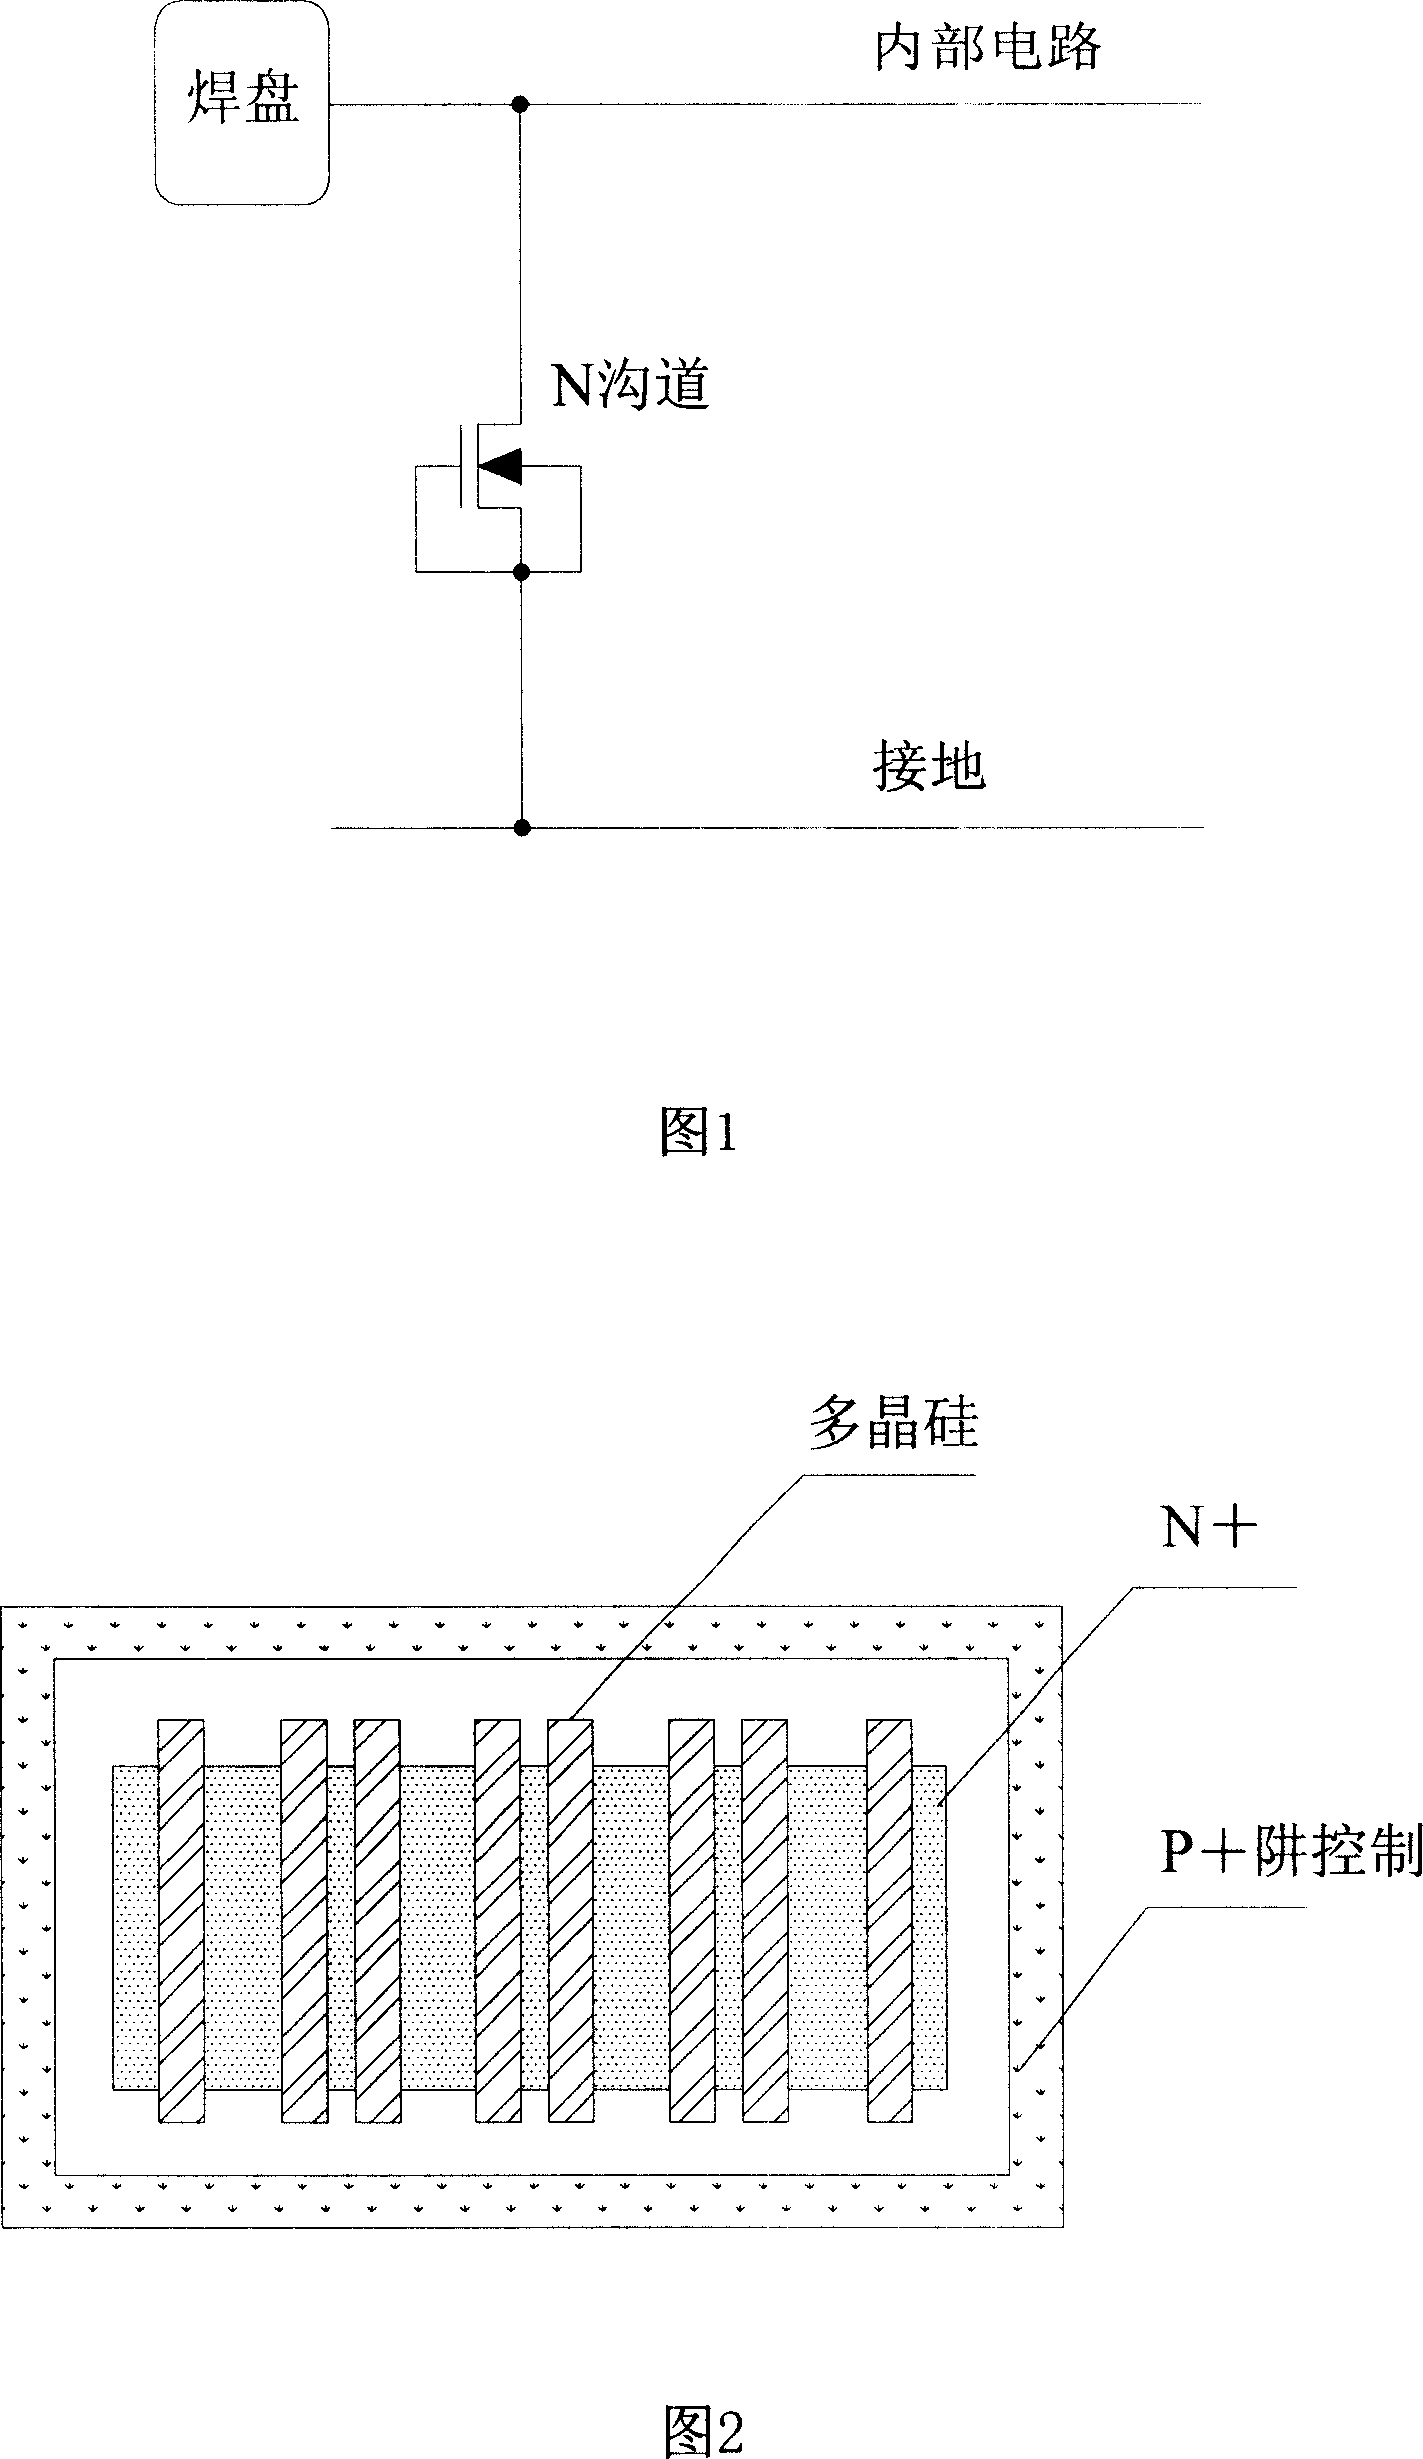 Electrostatic discharging protection circuit triggered by lining-bottom